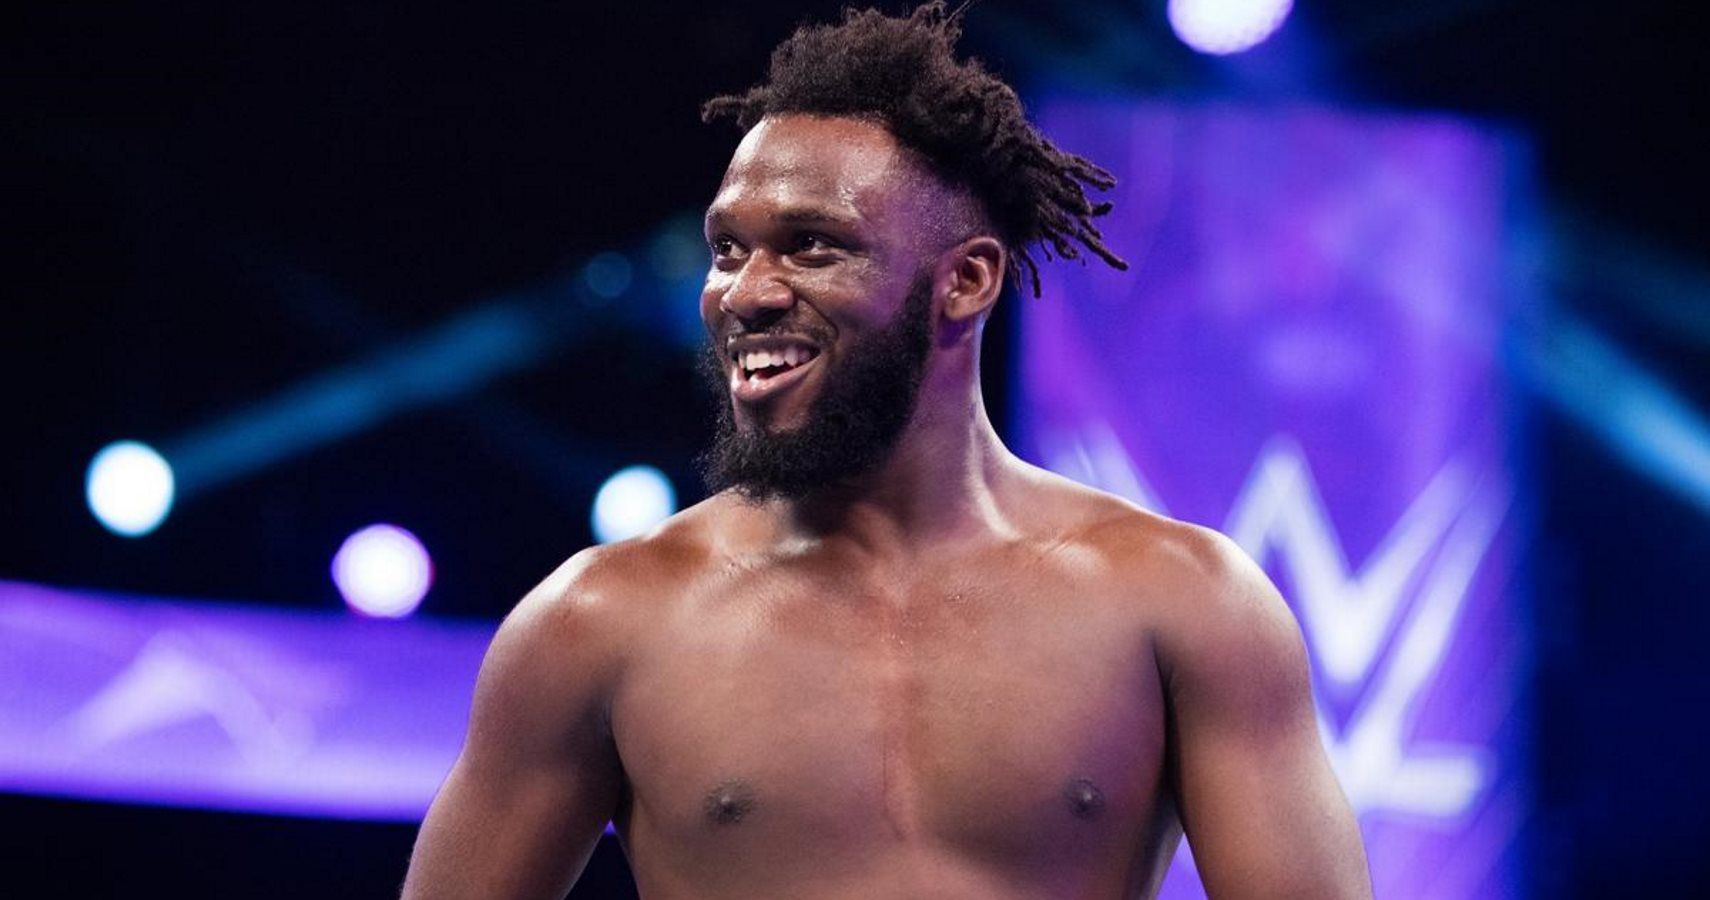 Rich Swann's First Impact Match Will Be Against Another 205 Live Alumni